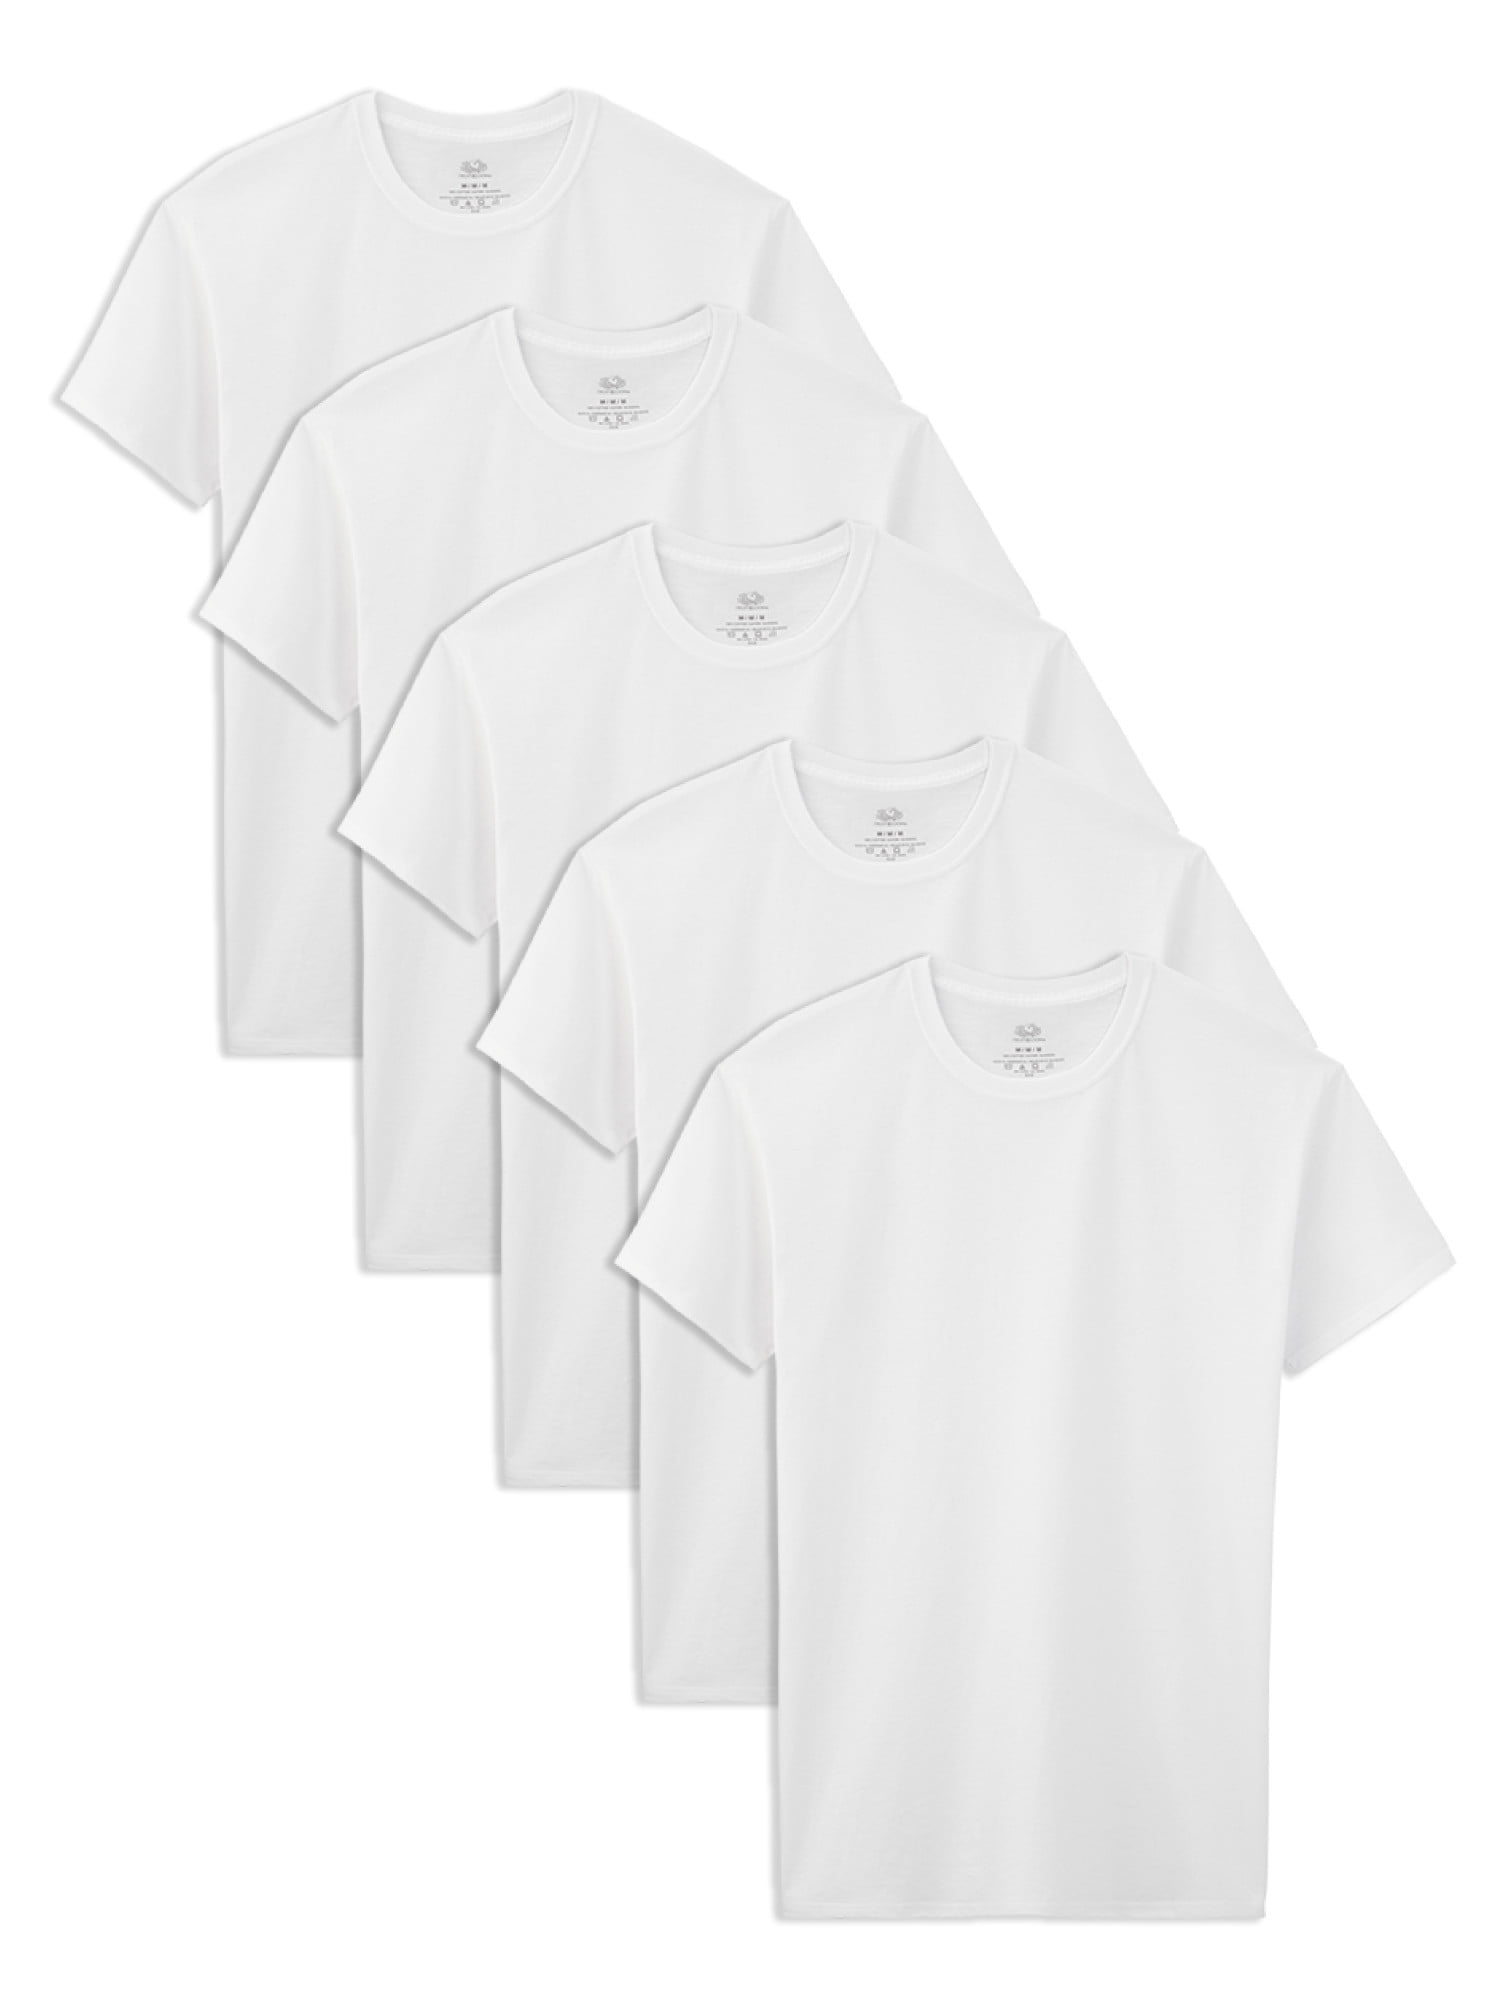 Fruit of the Loom Boys Undershirts, 5 Pack White Cotton Crew T-Shirts ...